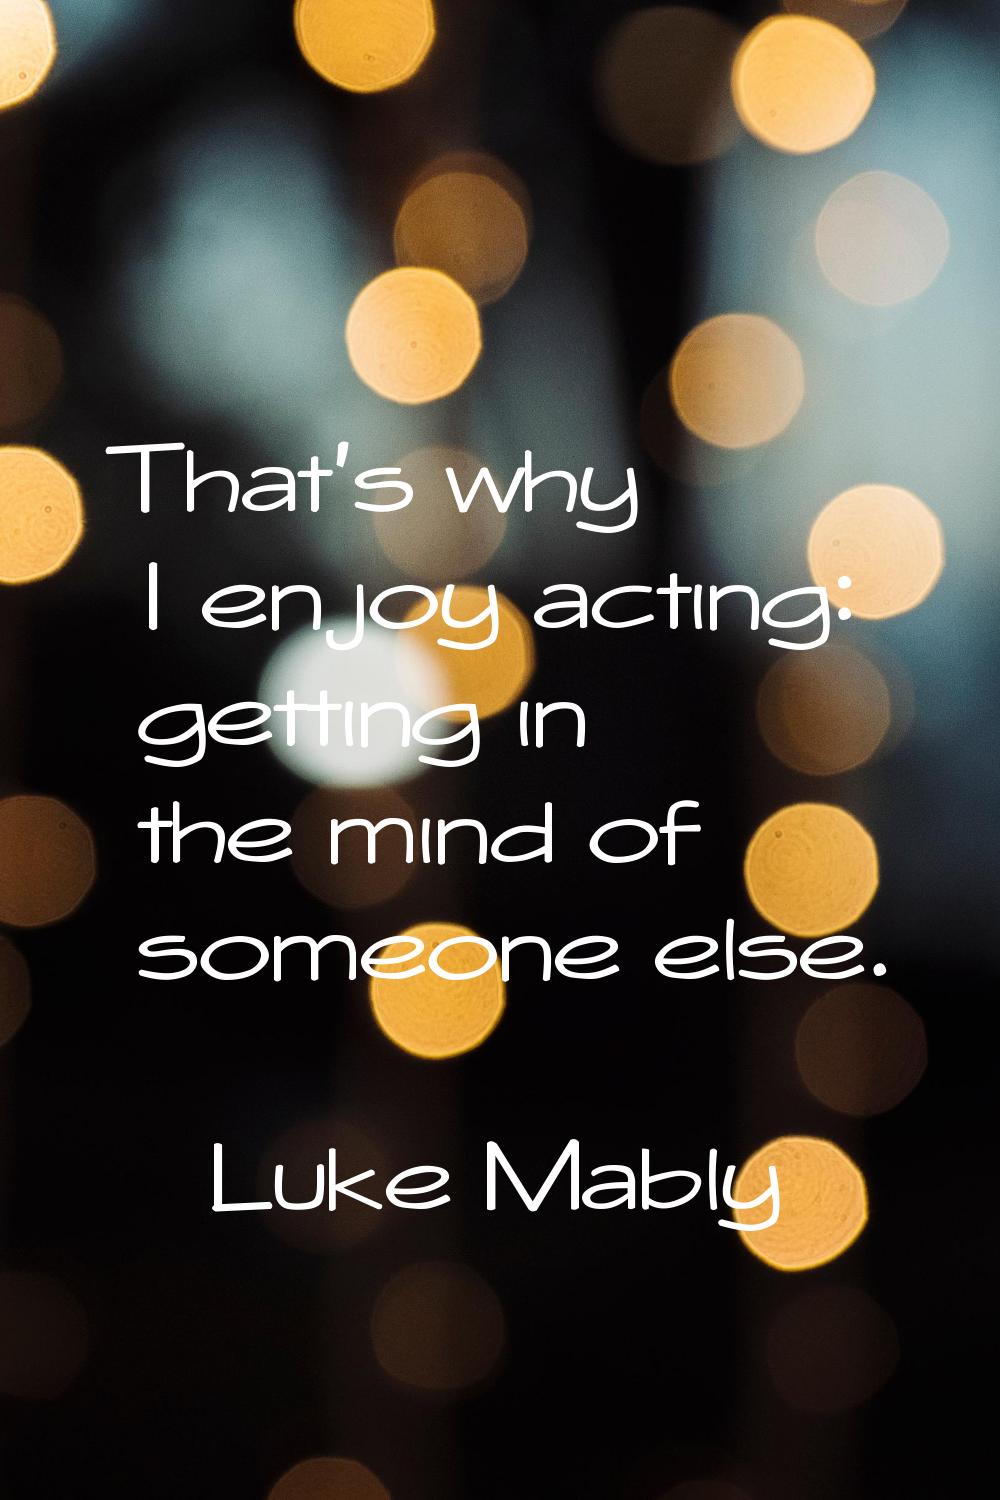 That's why I enjoy acting: getting in the mind of someone else.